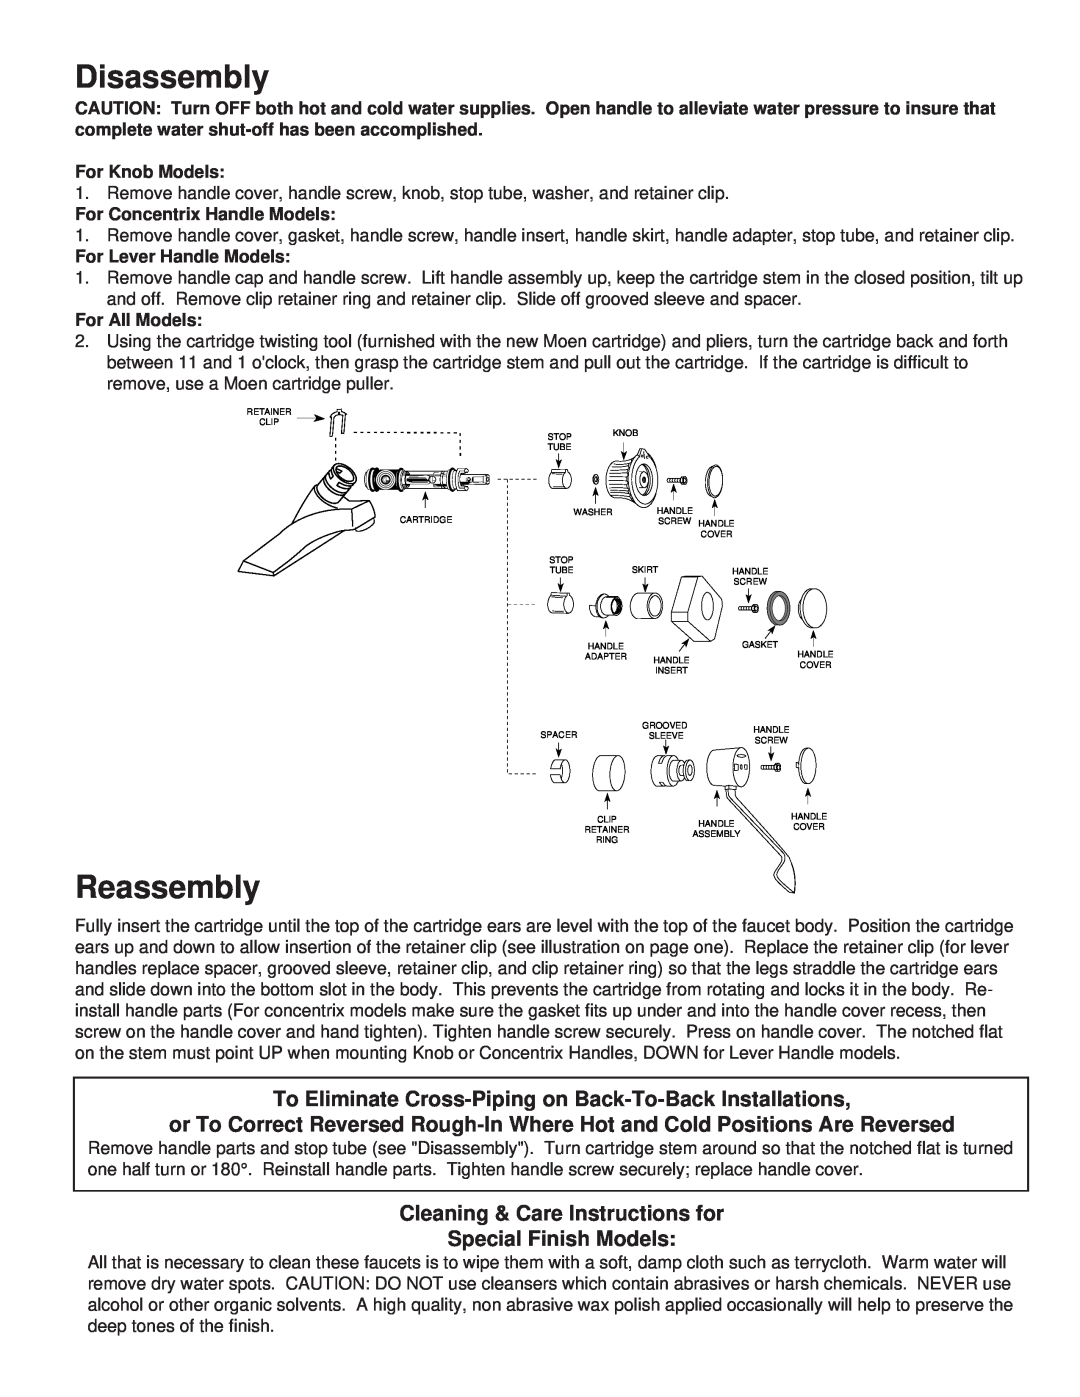 Moen MT138A installation instructions Disassembly, Reassembly, Cleaning & Care Instructions for, Special Finish Models 